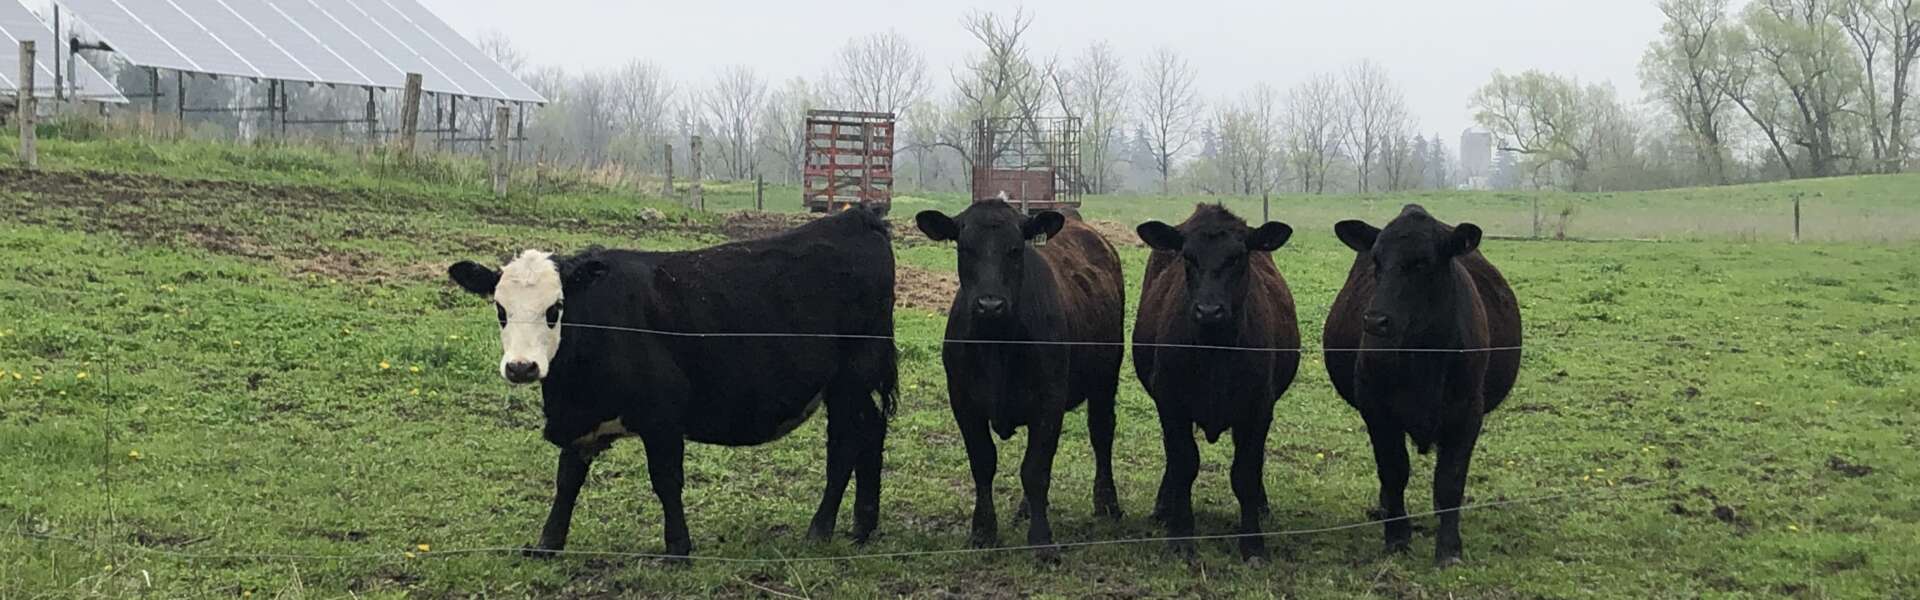 Four cows stand in a row in a foggy field in spring